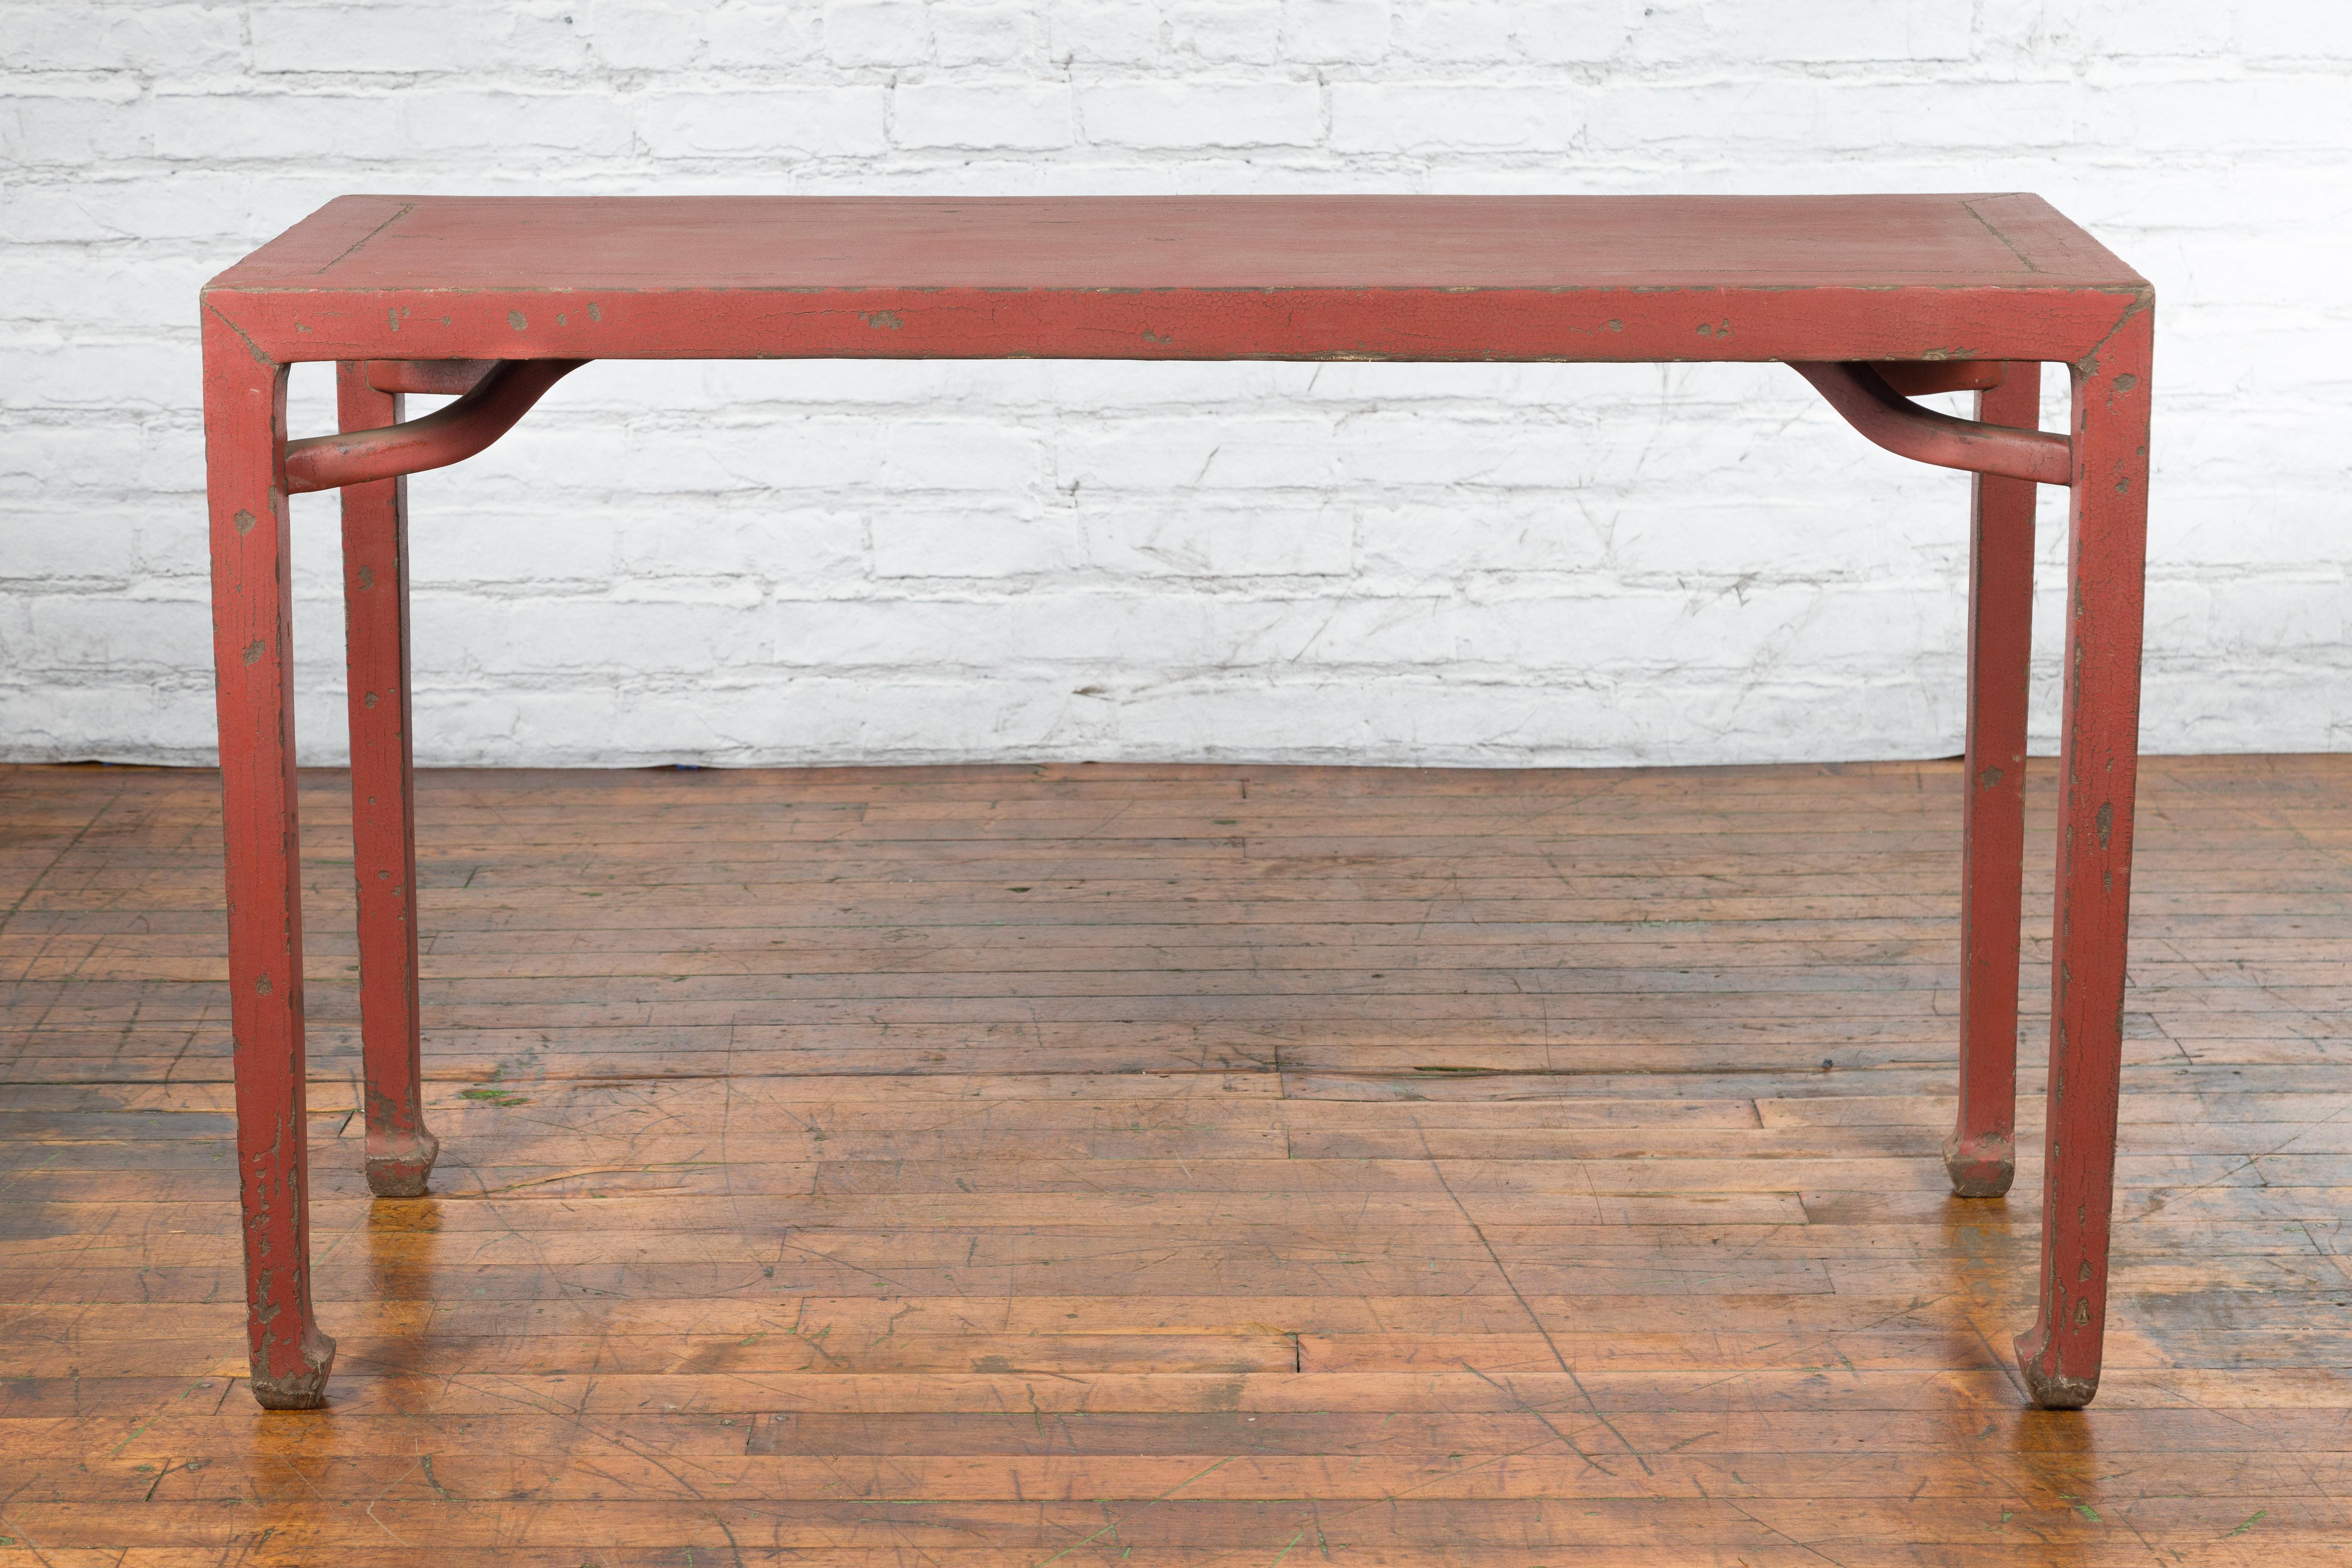 A Chinese Qing Dynasty period yumu wood wine console table from the 19th century, with original red lacquer and horse hoof extremities. Created in China during the Qing Dynasty, this yumu wood table features a rectangular top with central board,